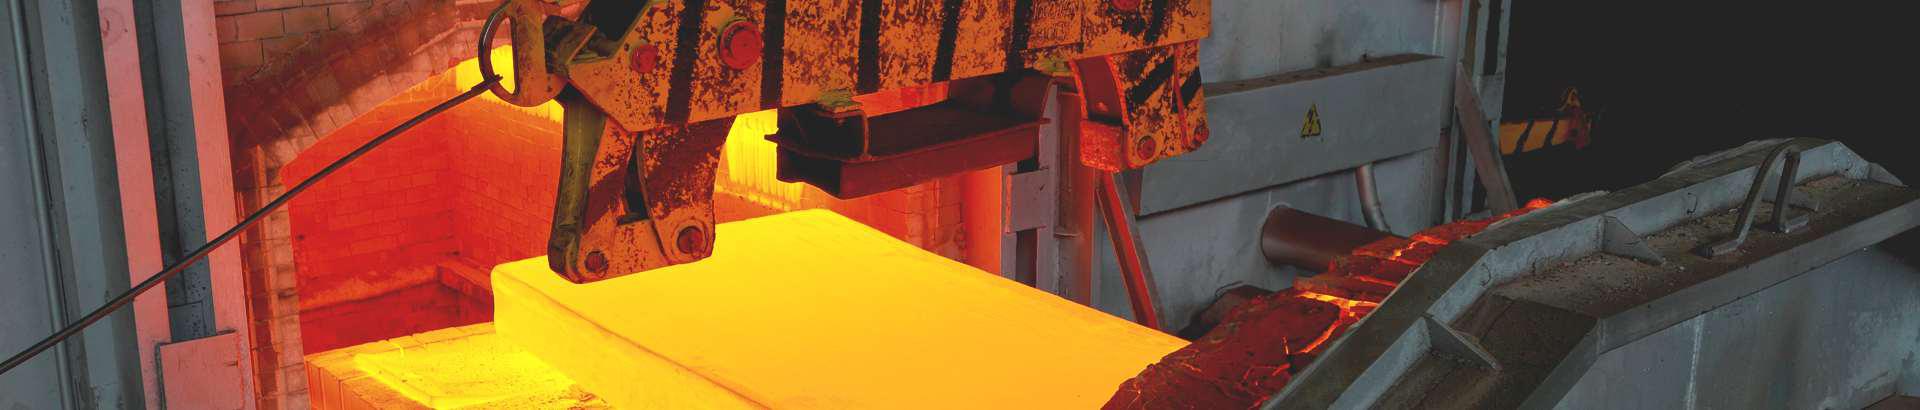 mineral resources and raw materials, Metal products, steel products